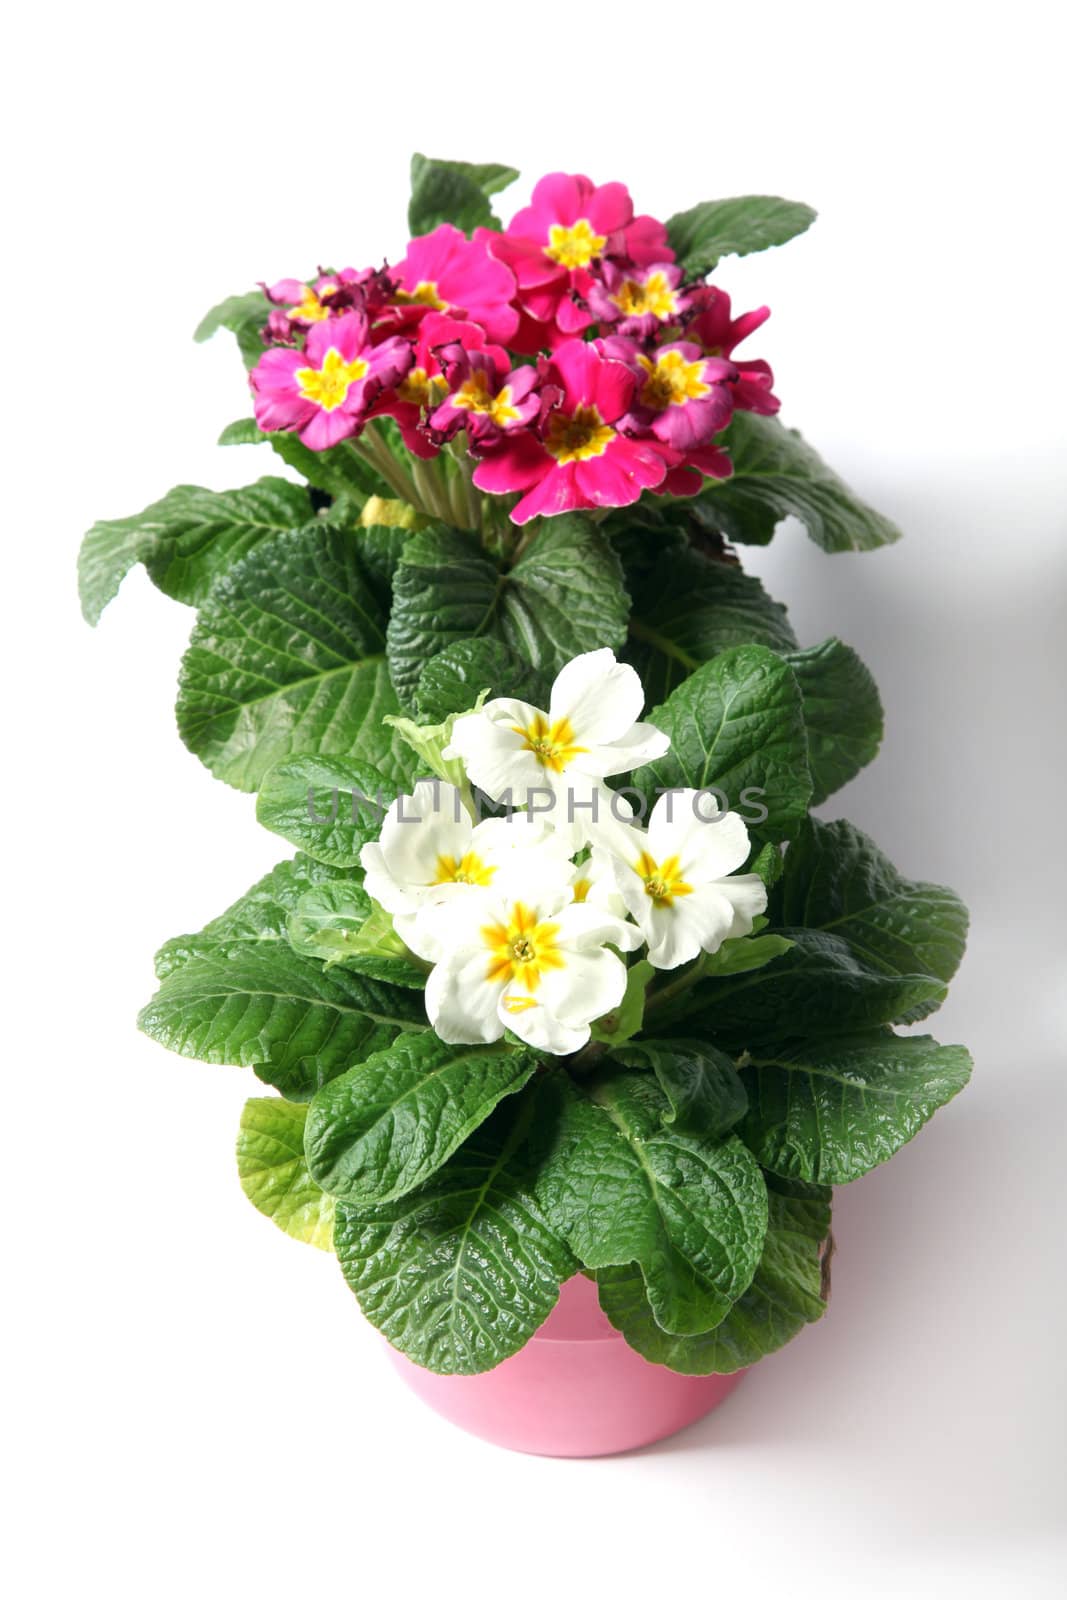 Spring primroses against a white background by Farina6000